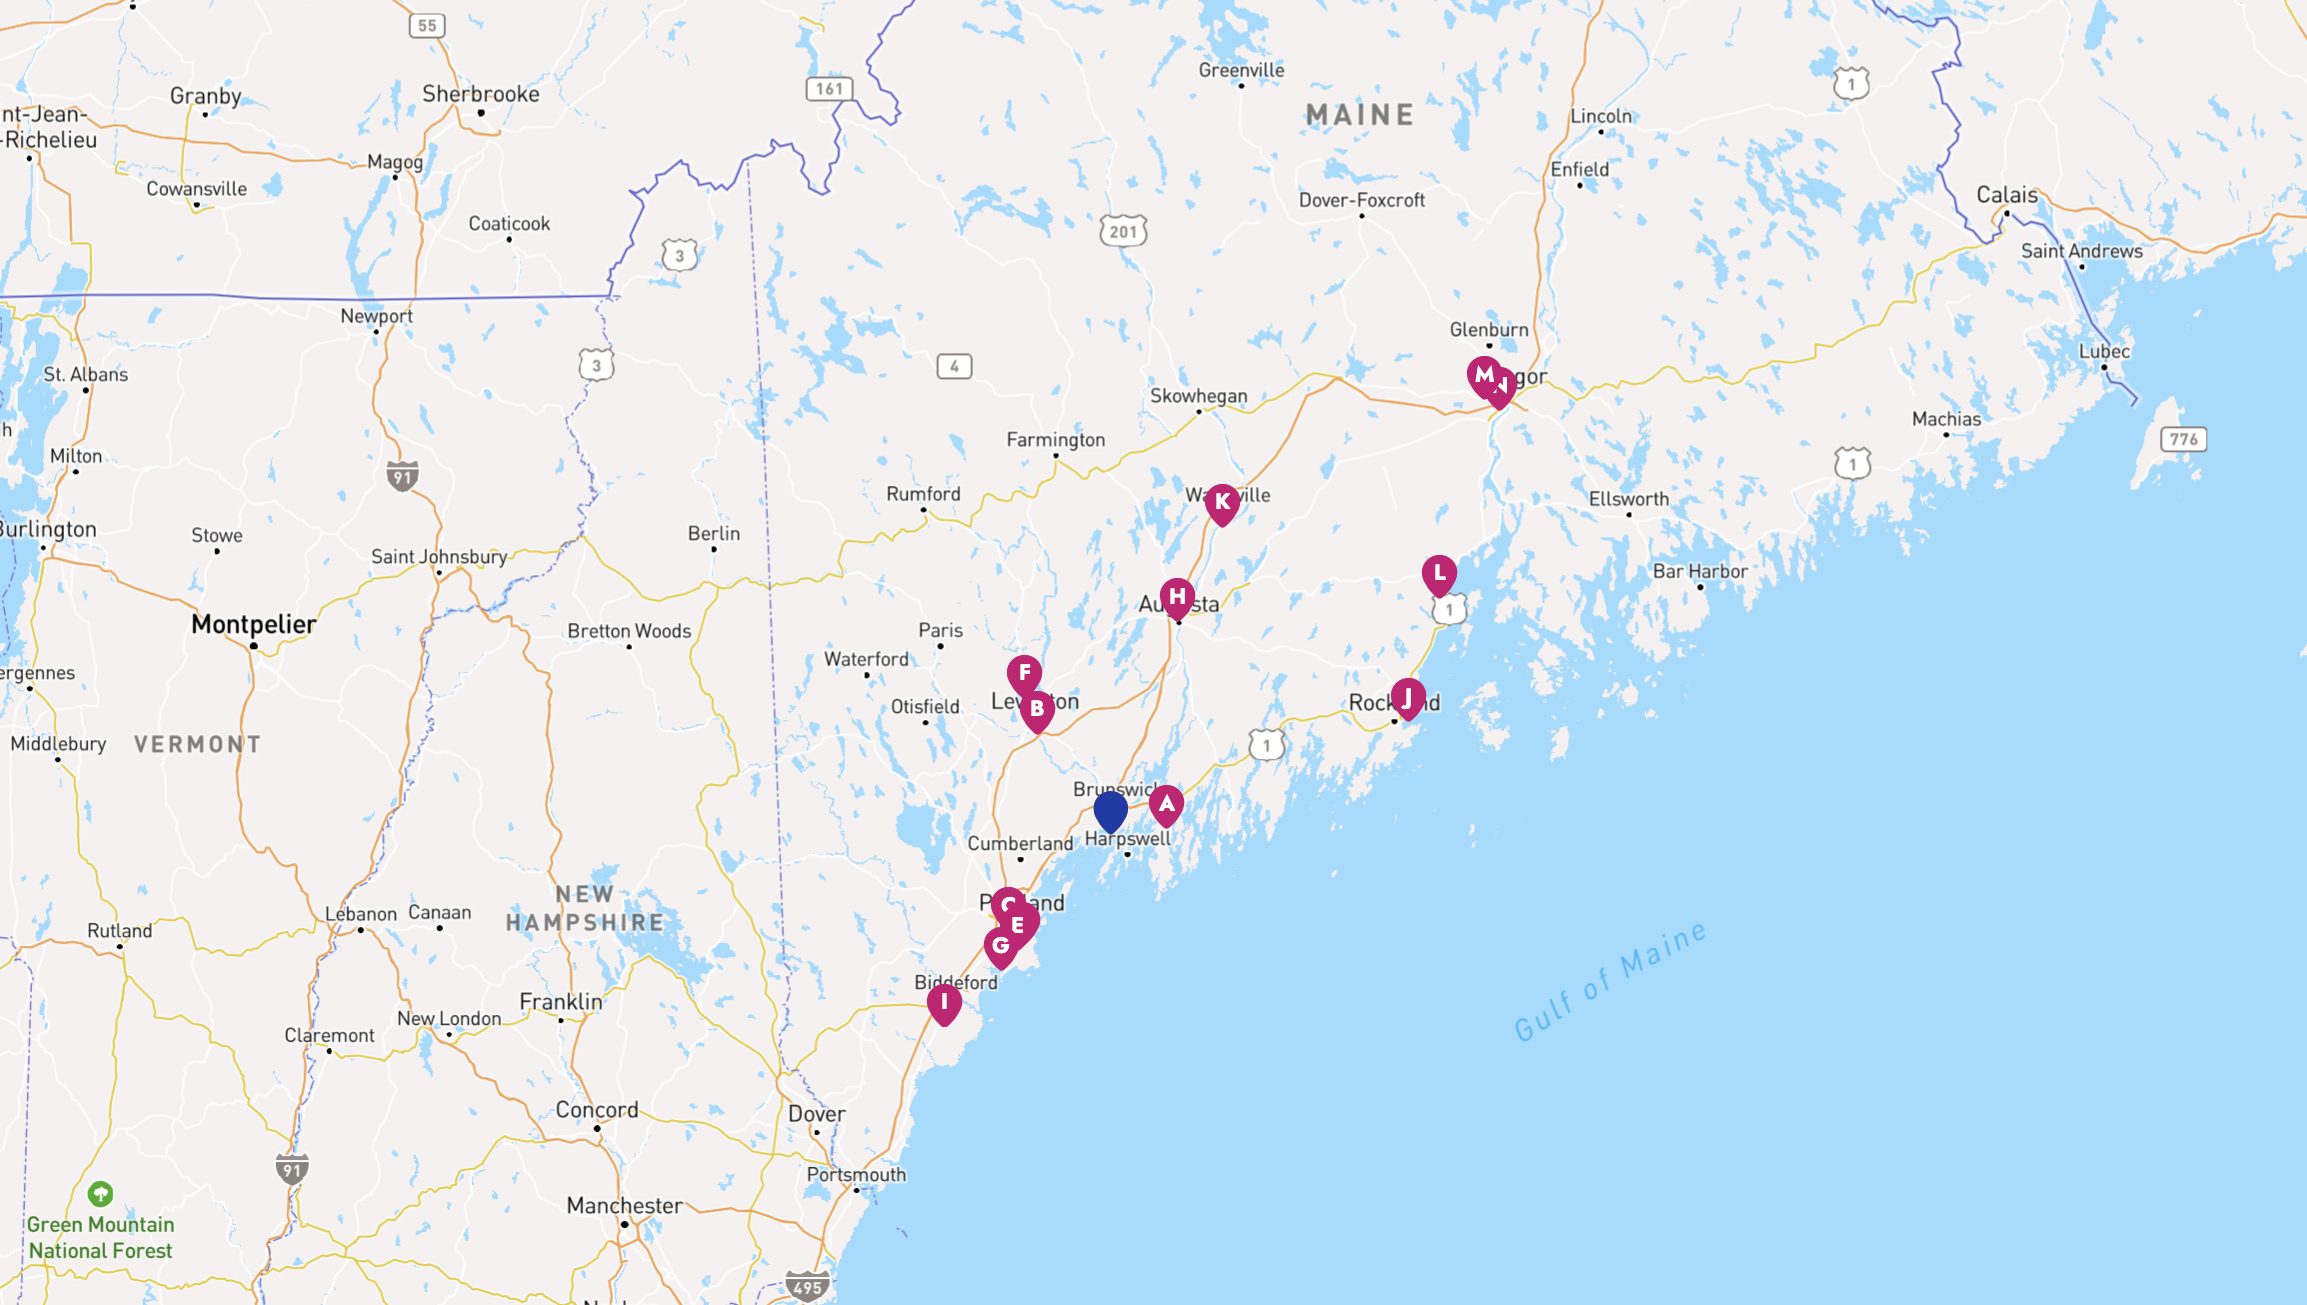 Image of the state of Maine with pins representing audiology facility locations